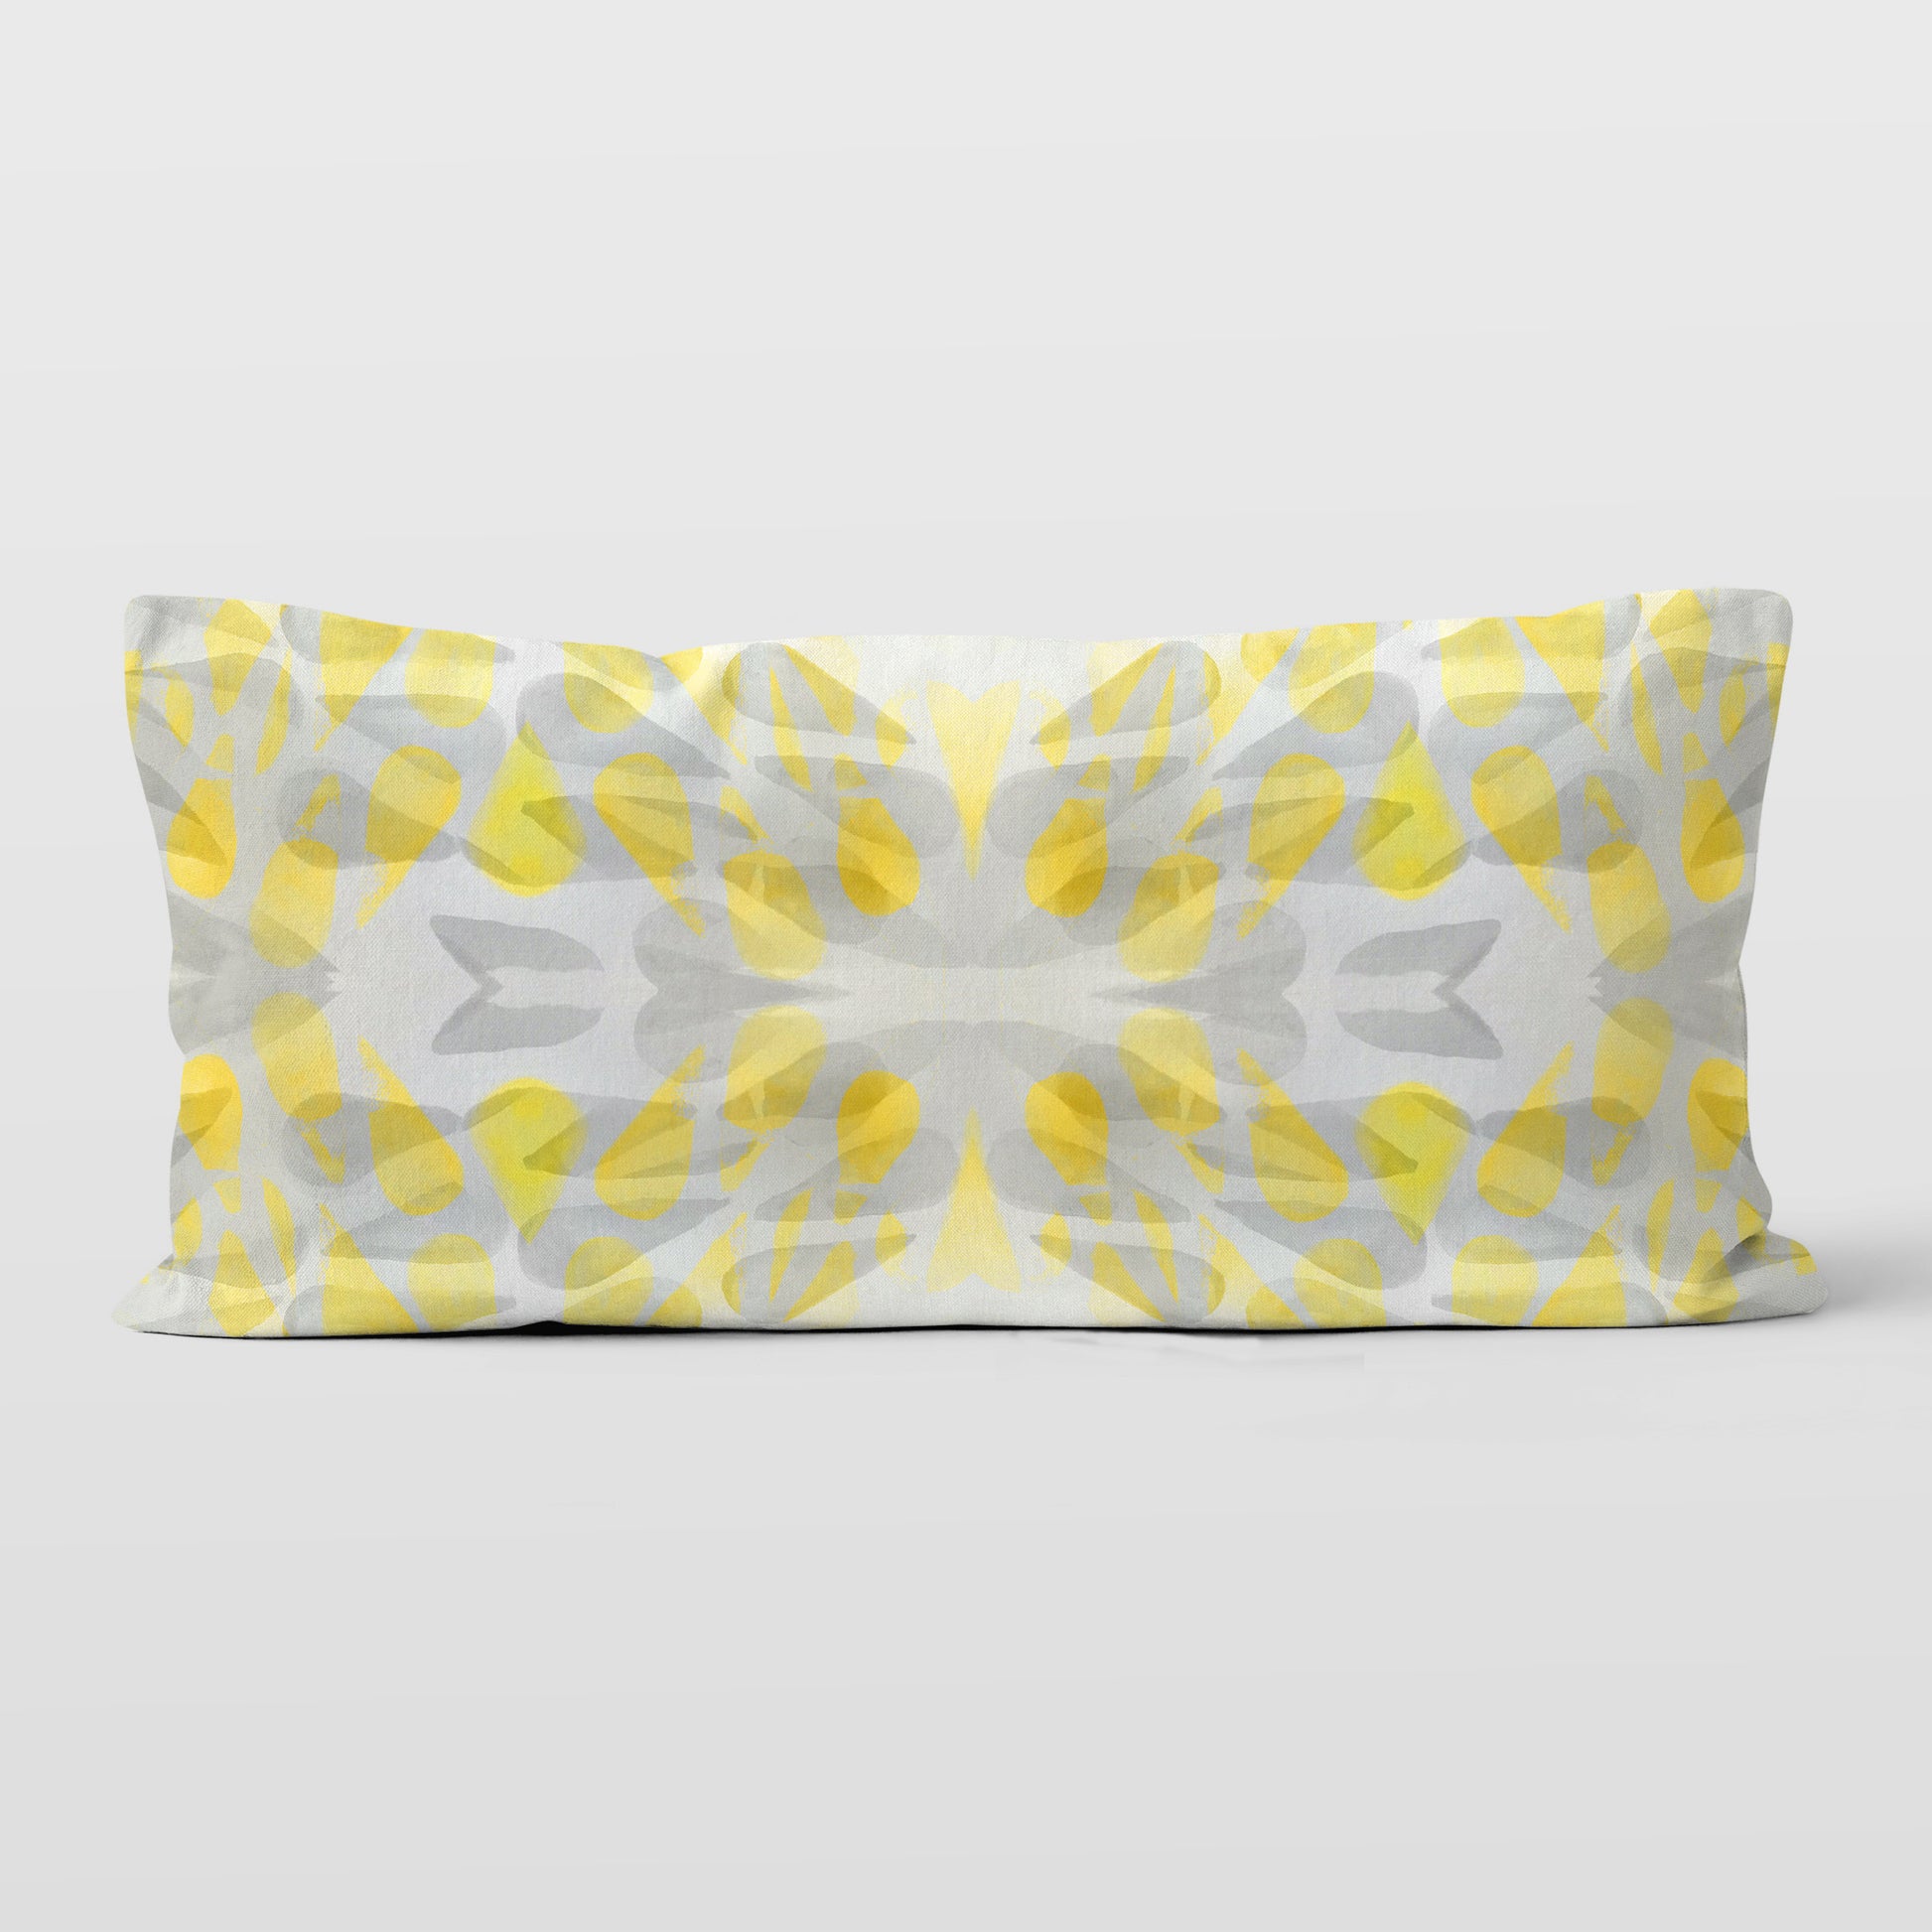 Rectangular lumbar pillow featuring an abstract hand-painted pattern in yellow and grey tones.